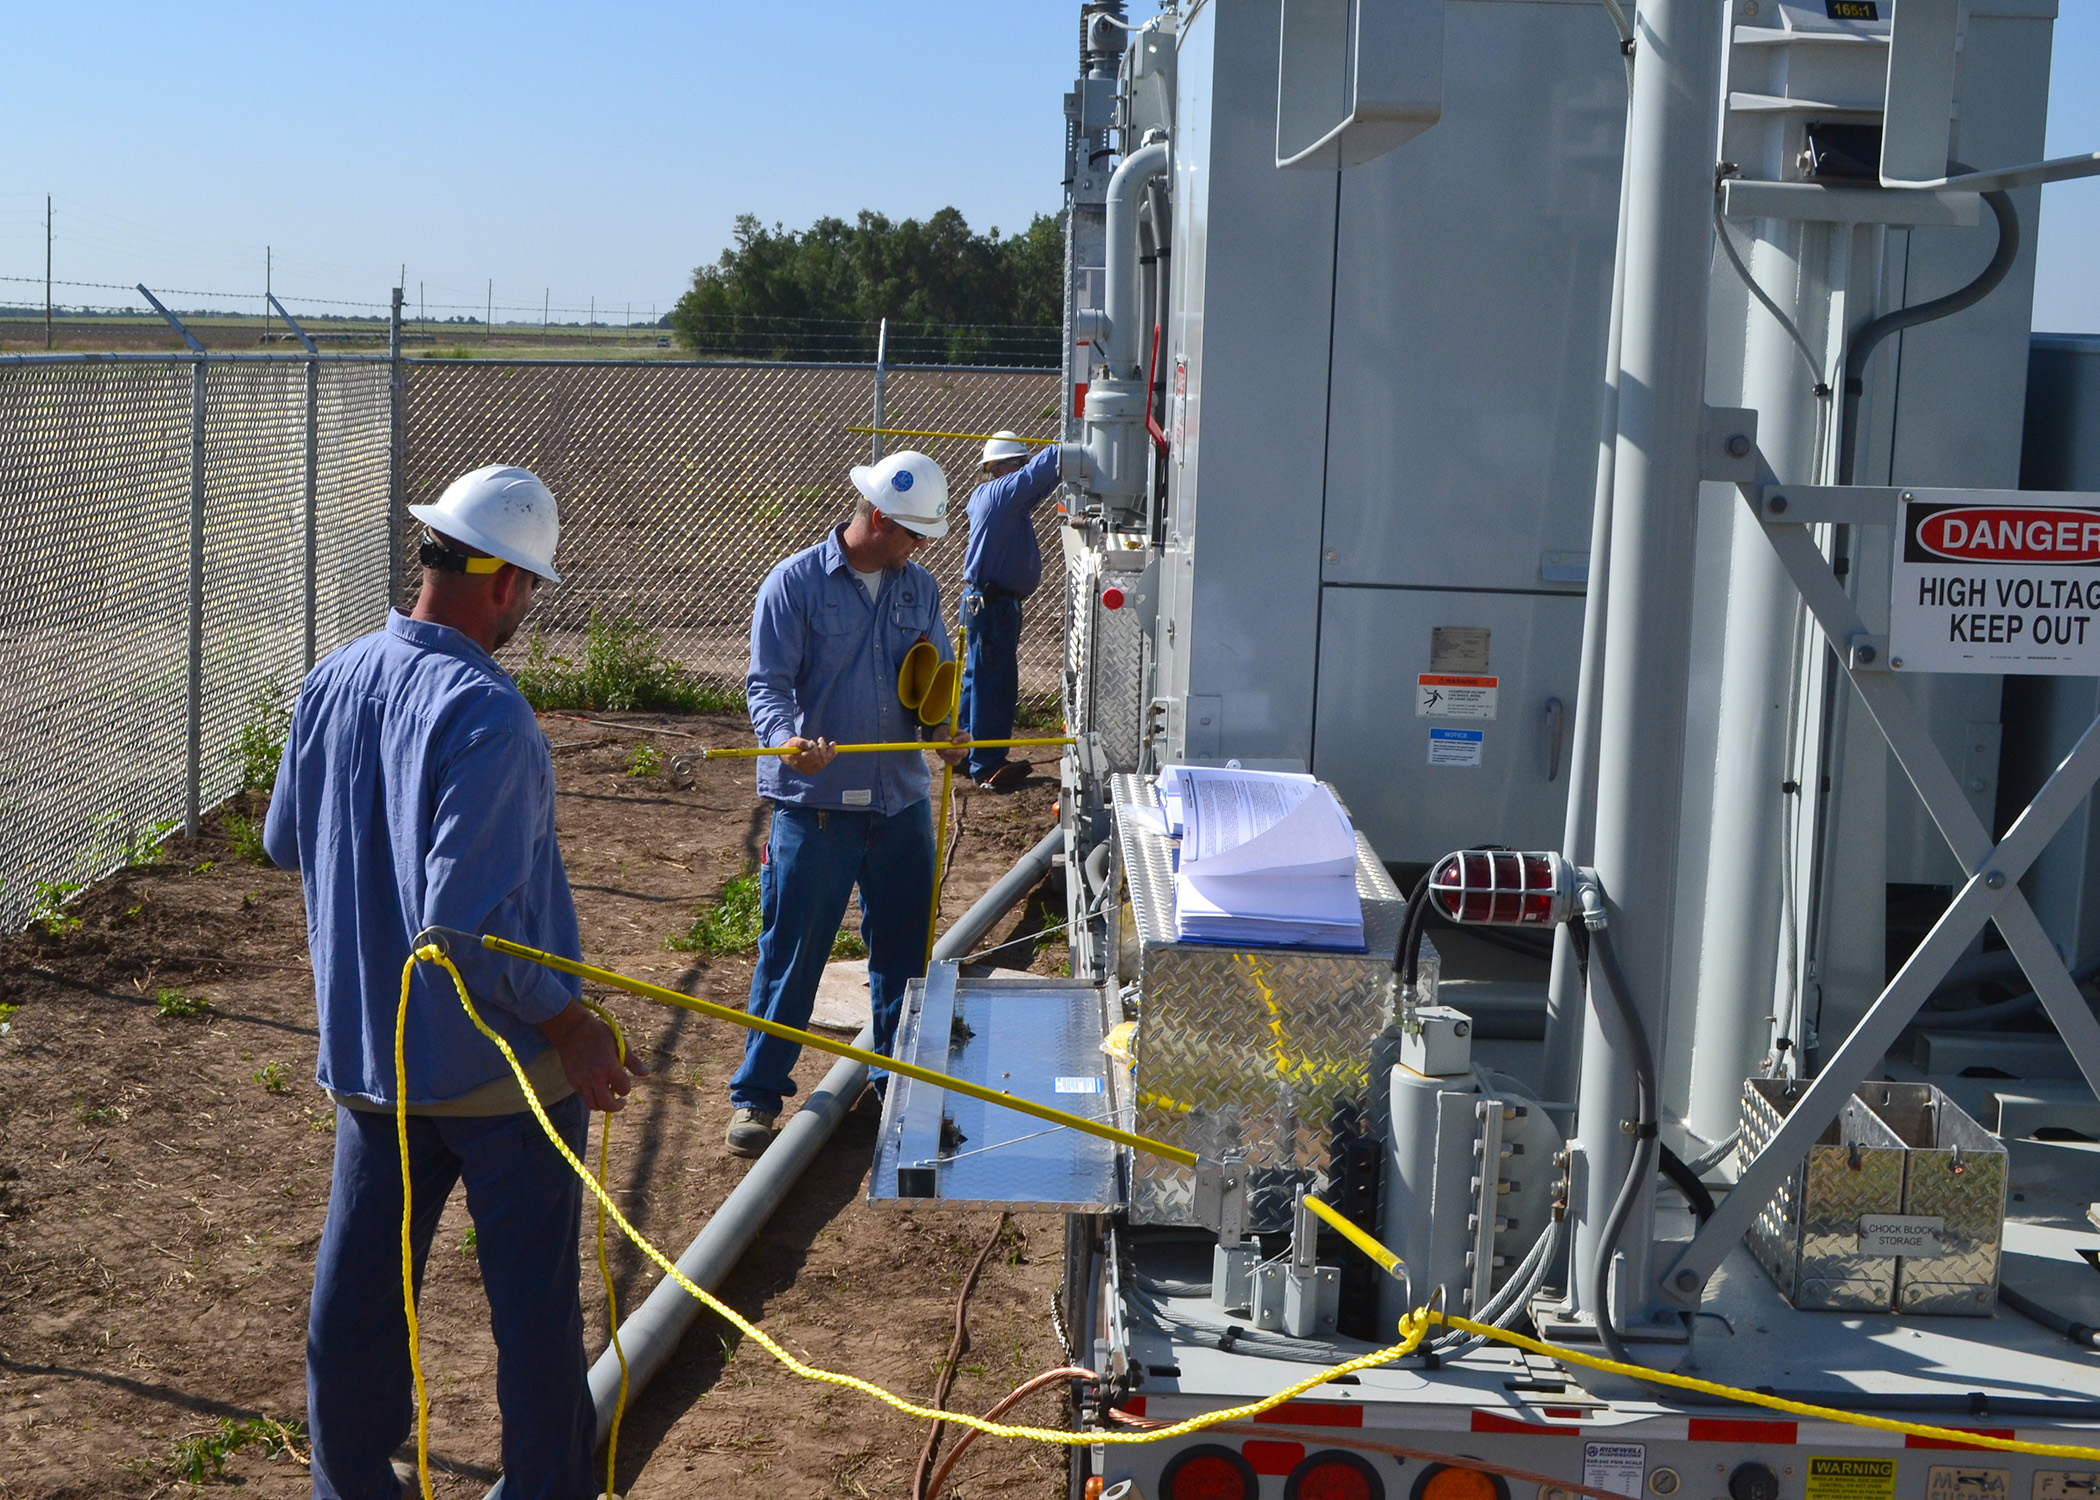 Three min in blue shirts and white hard hats install a yellow rope barrier around a mobile substation, designed to keep people from making contact with equipment once energized.